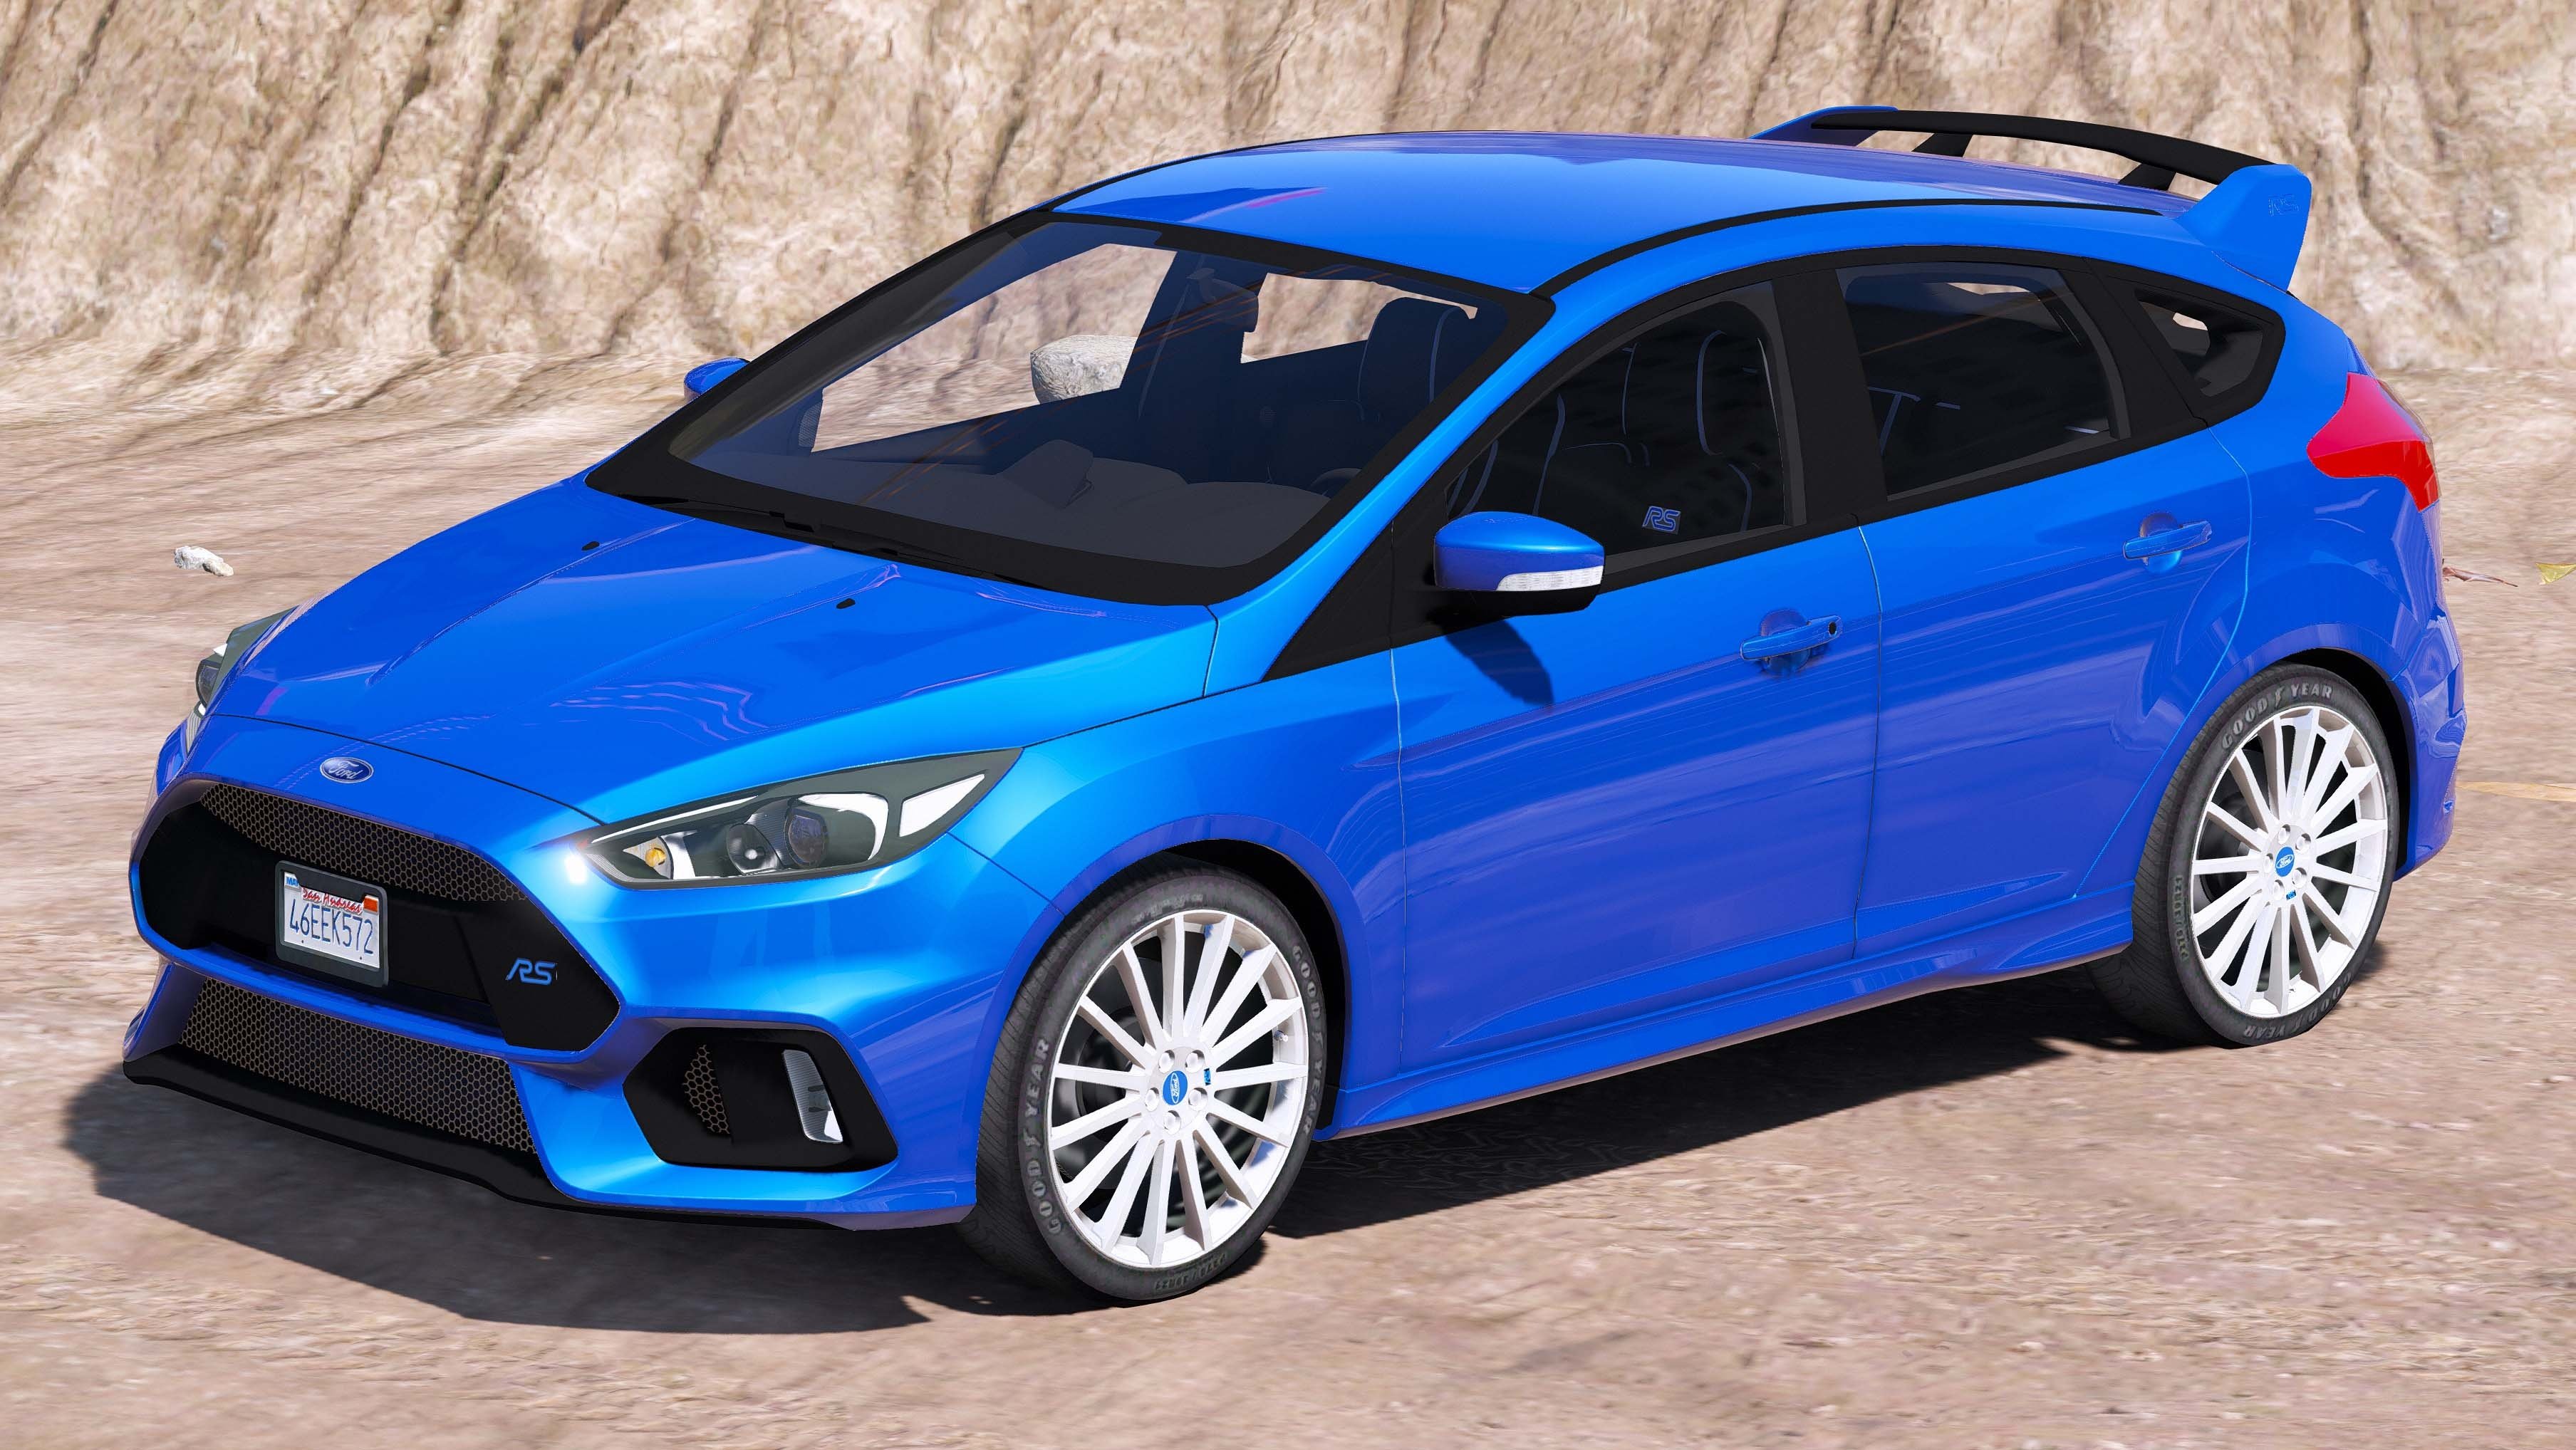 Selling Ford Focus RS Auto Sales Big City Roleplay